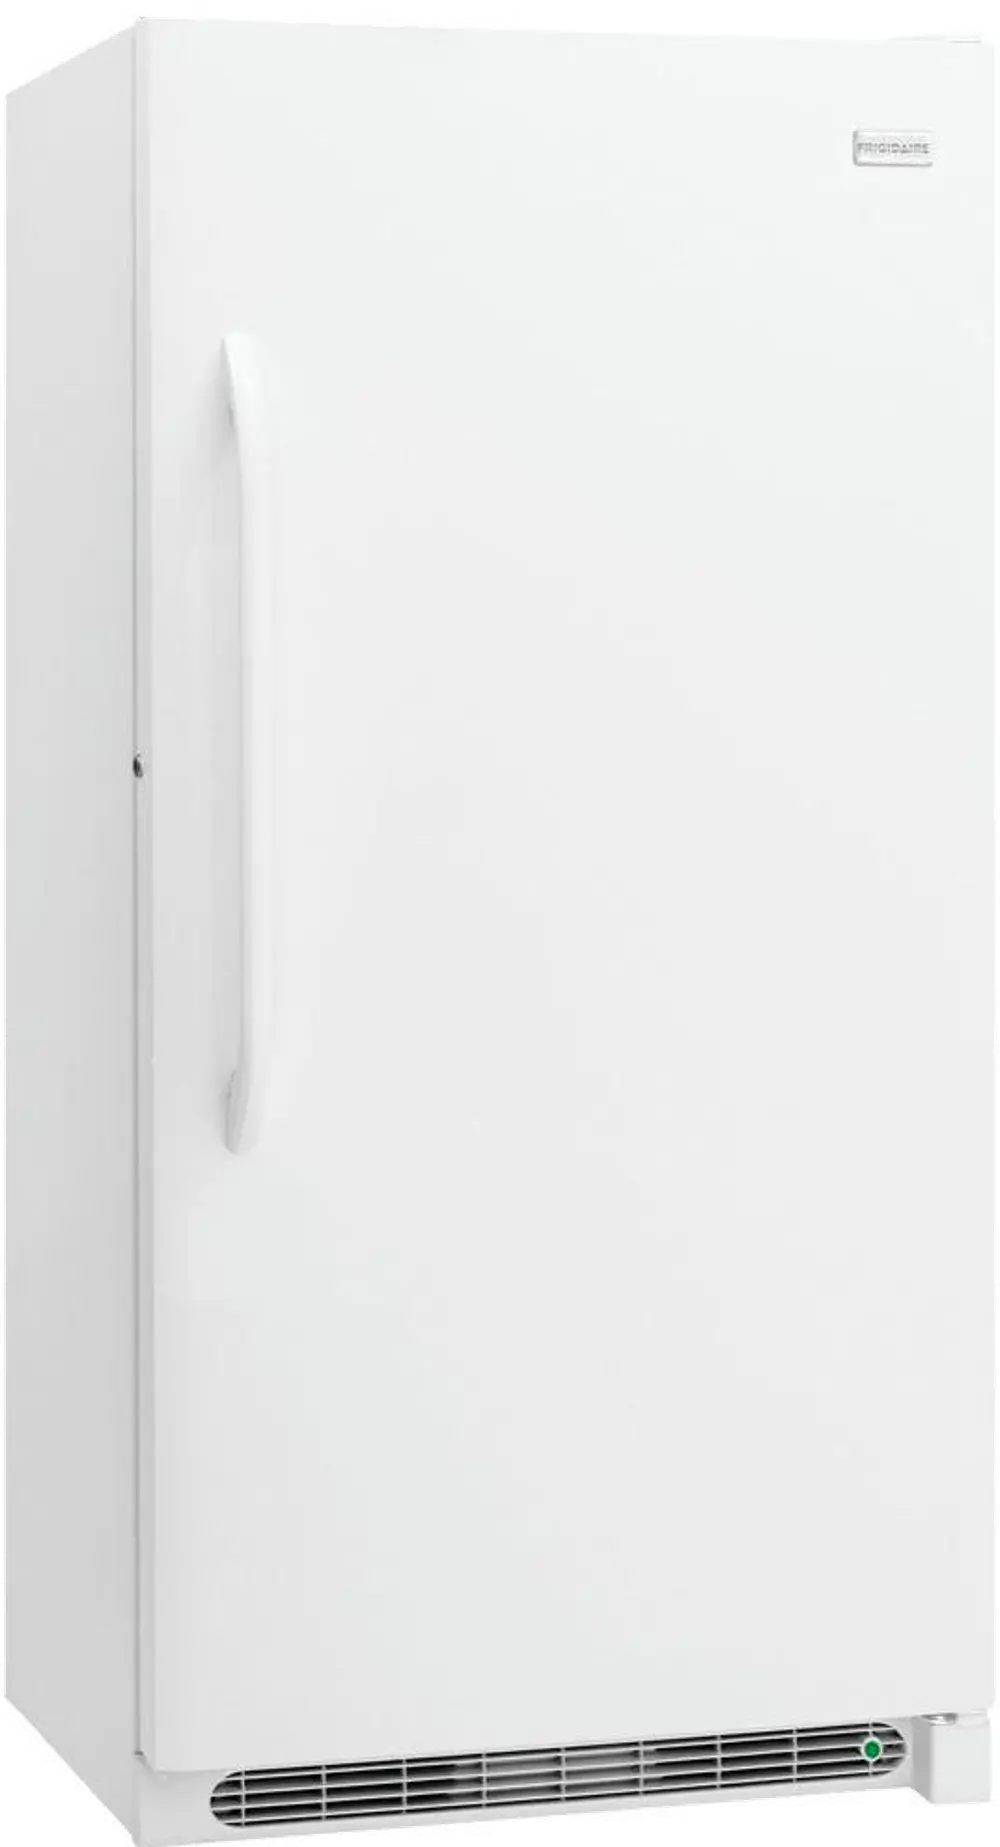 FFFH17F4QW Frigidaire Upright Freezer with SpaceWise Adjustable Dividers - 17 cu. ft. White-1